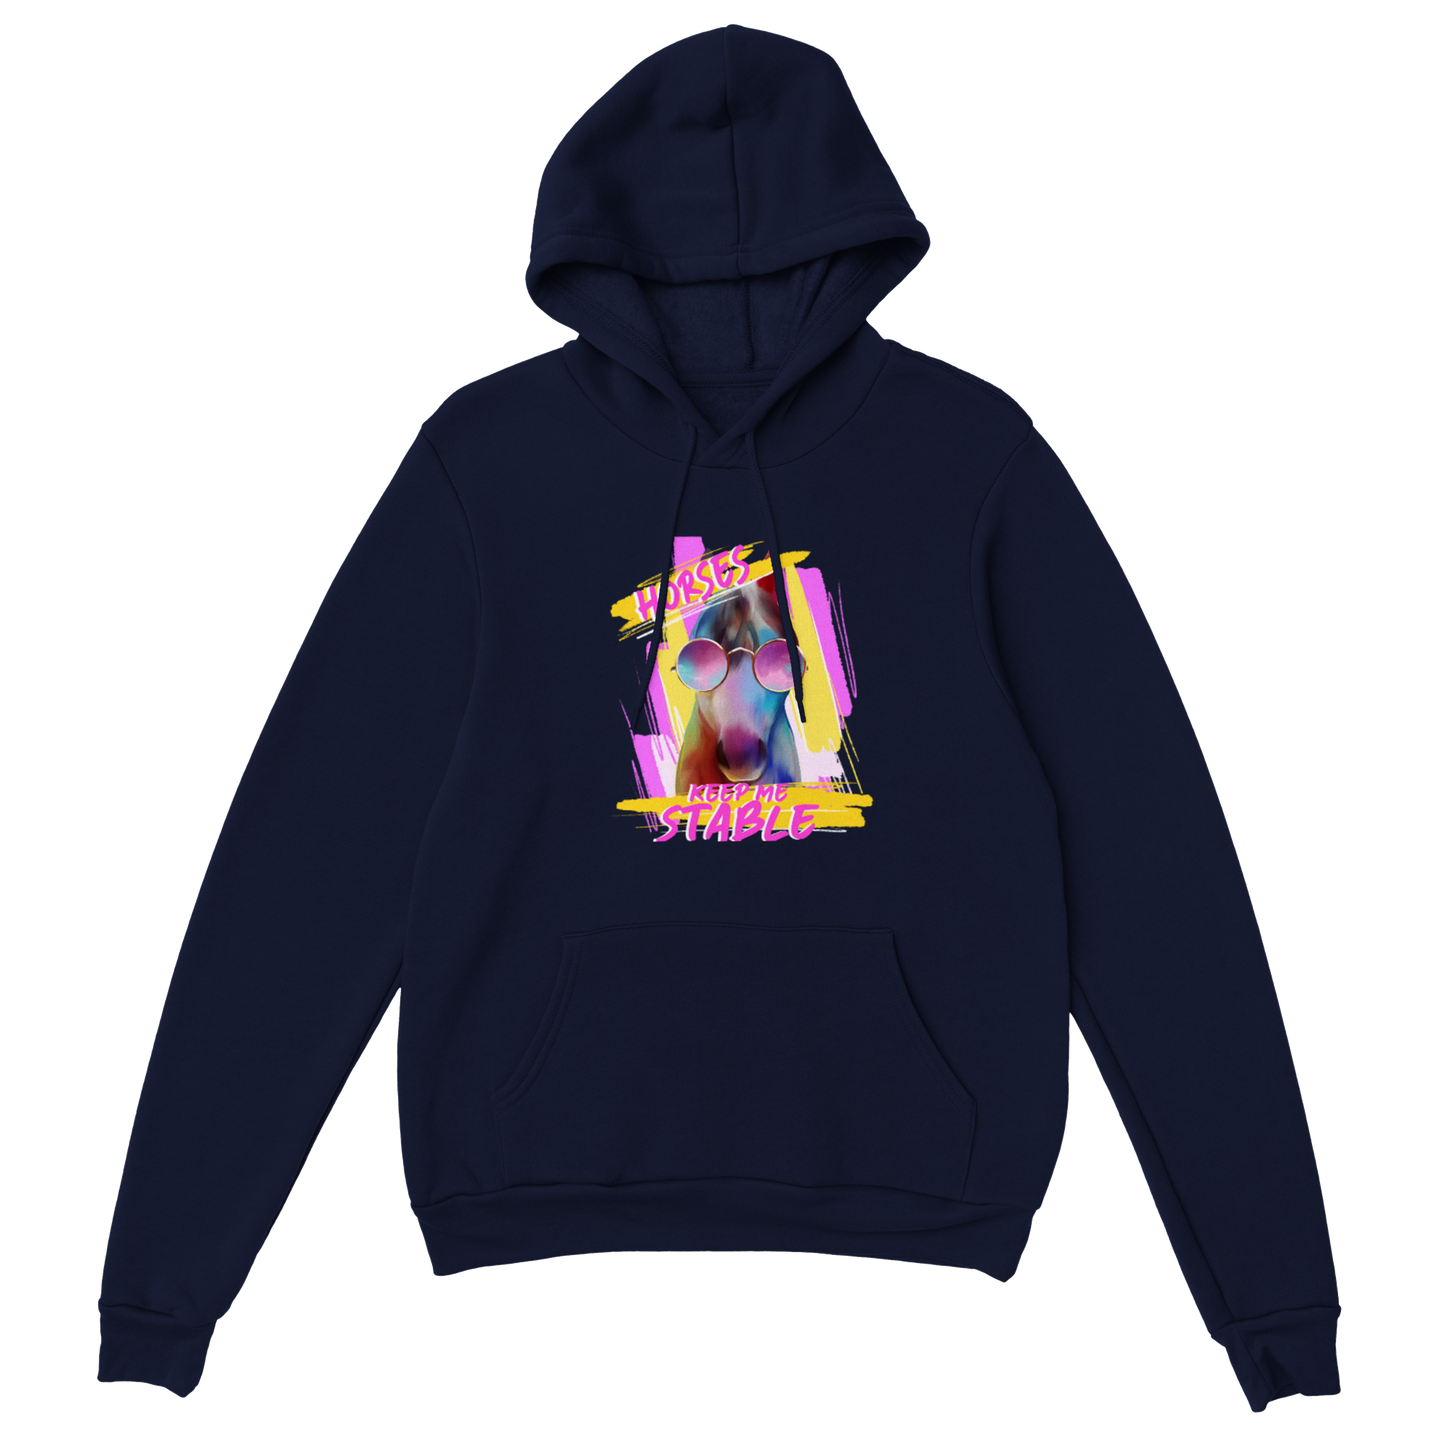 Hand Drawn Horse || Unisex Hoodie - Design: "STABLE"; Static Design; Personalizable Back Text